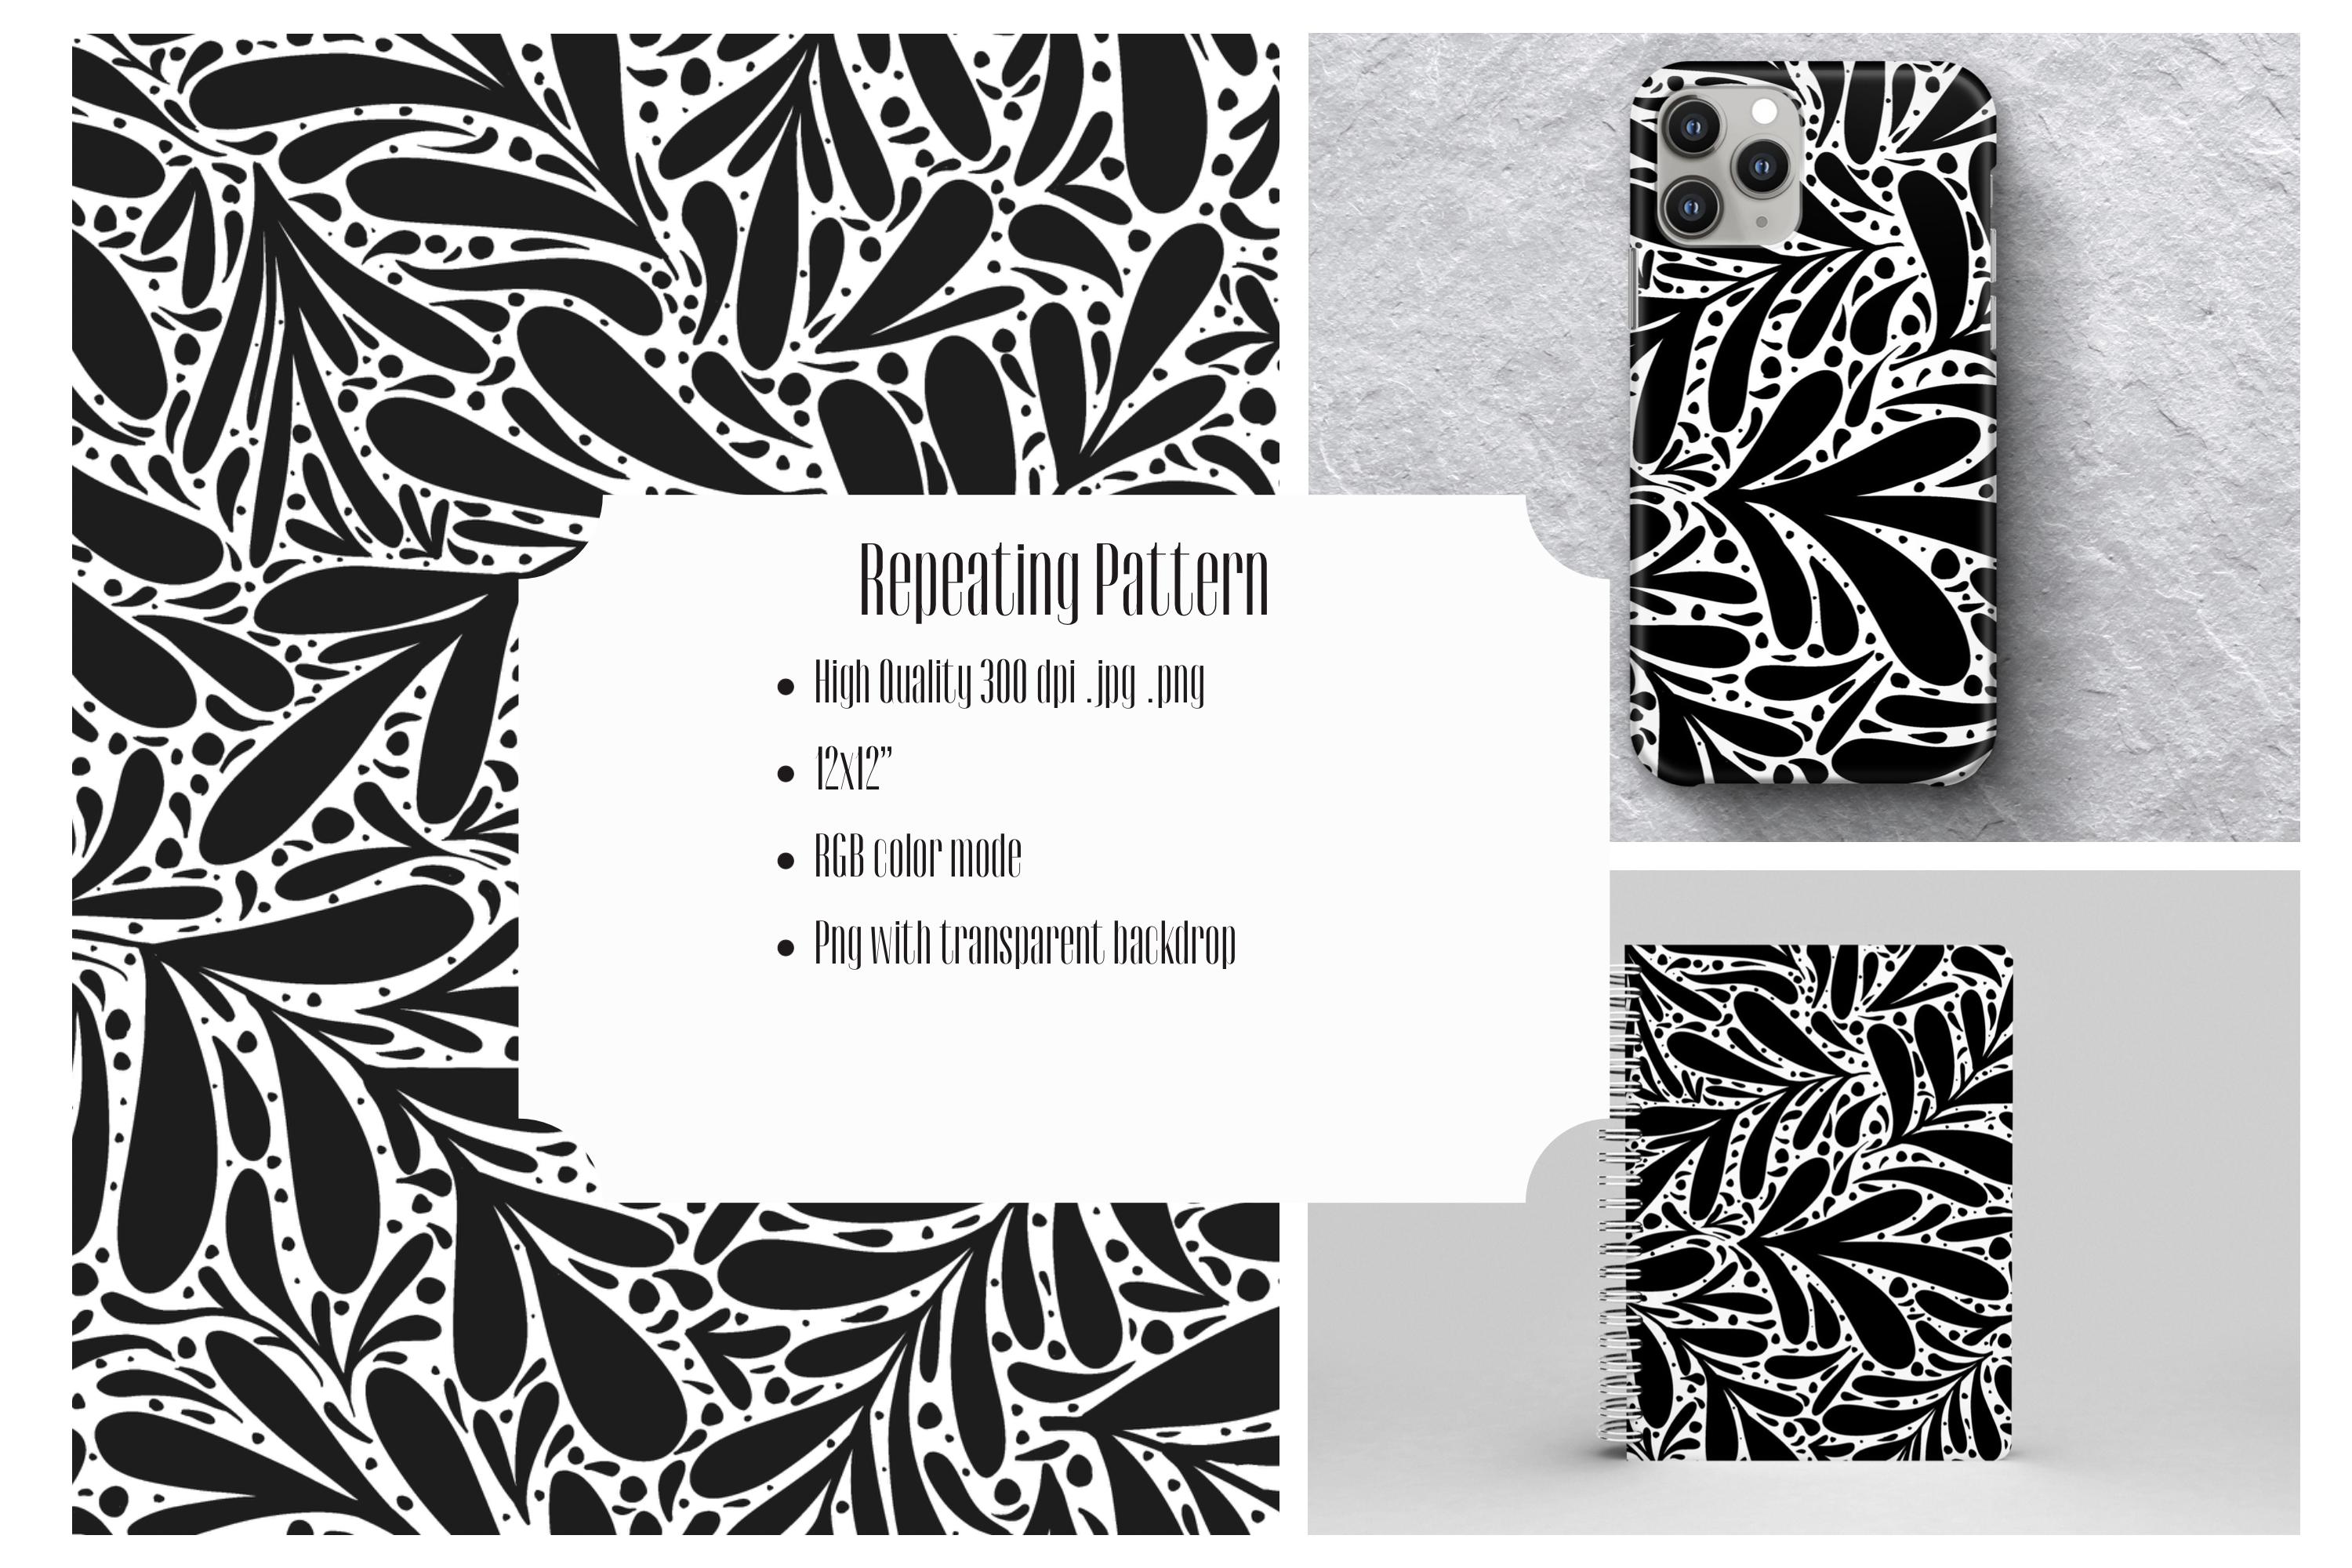 Repeating Pattern in Black and White